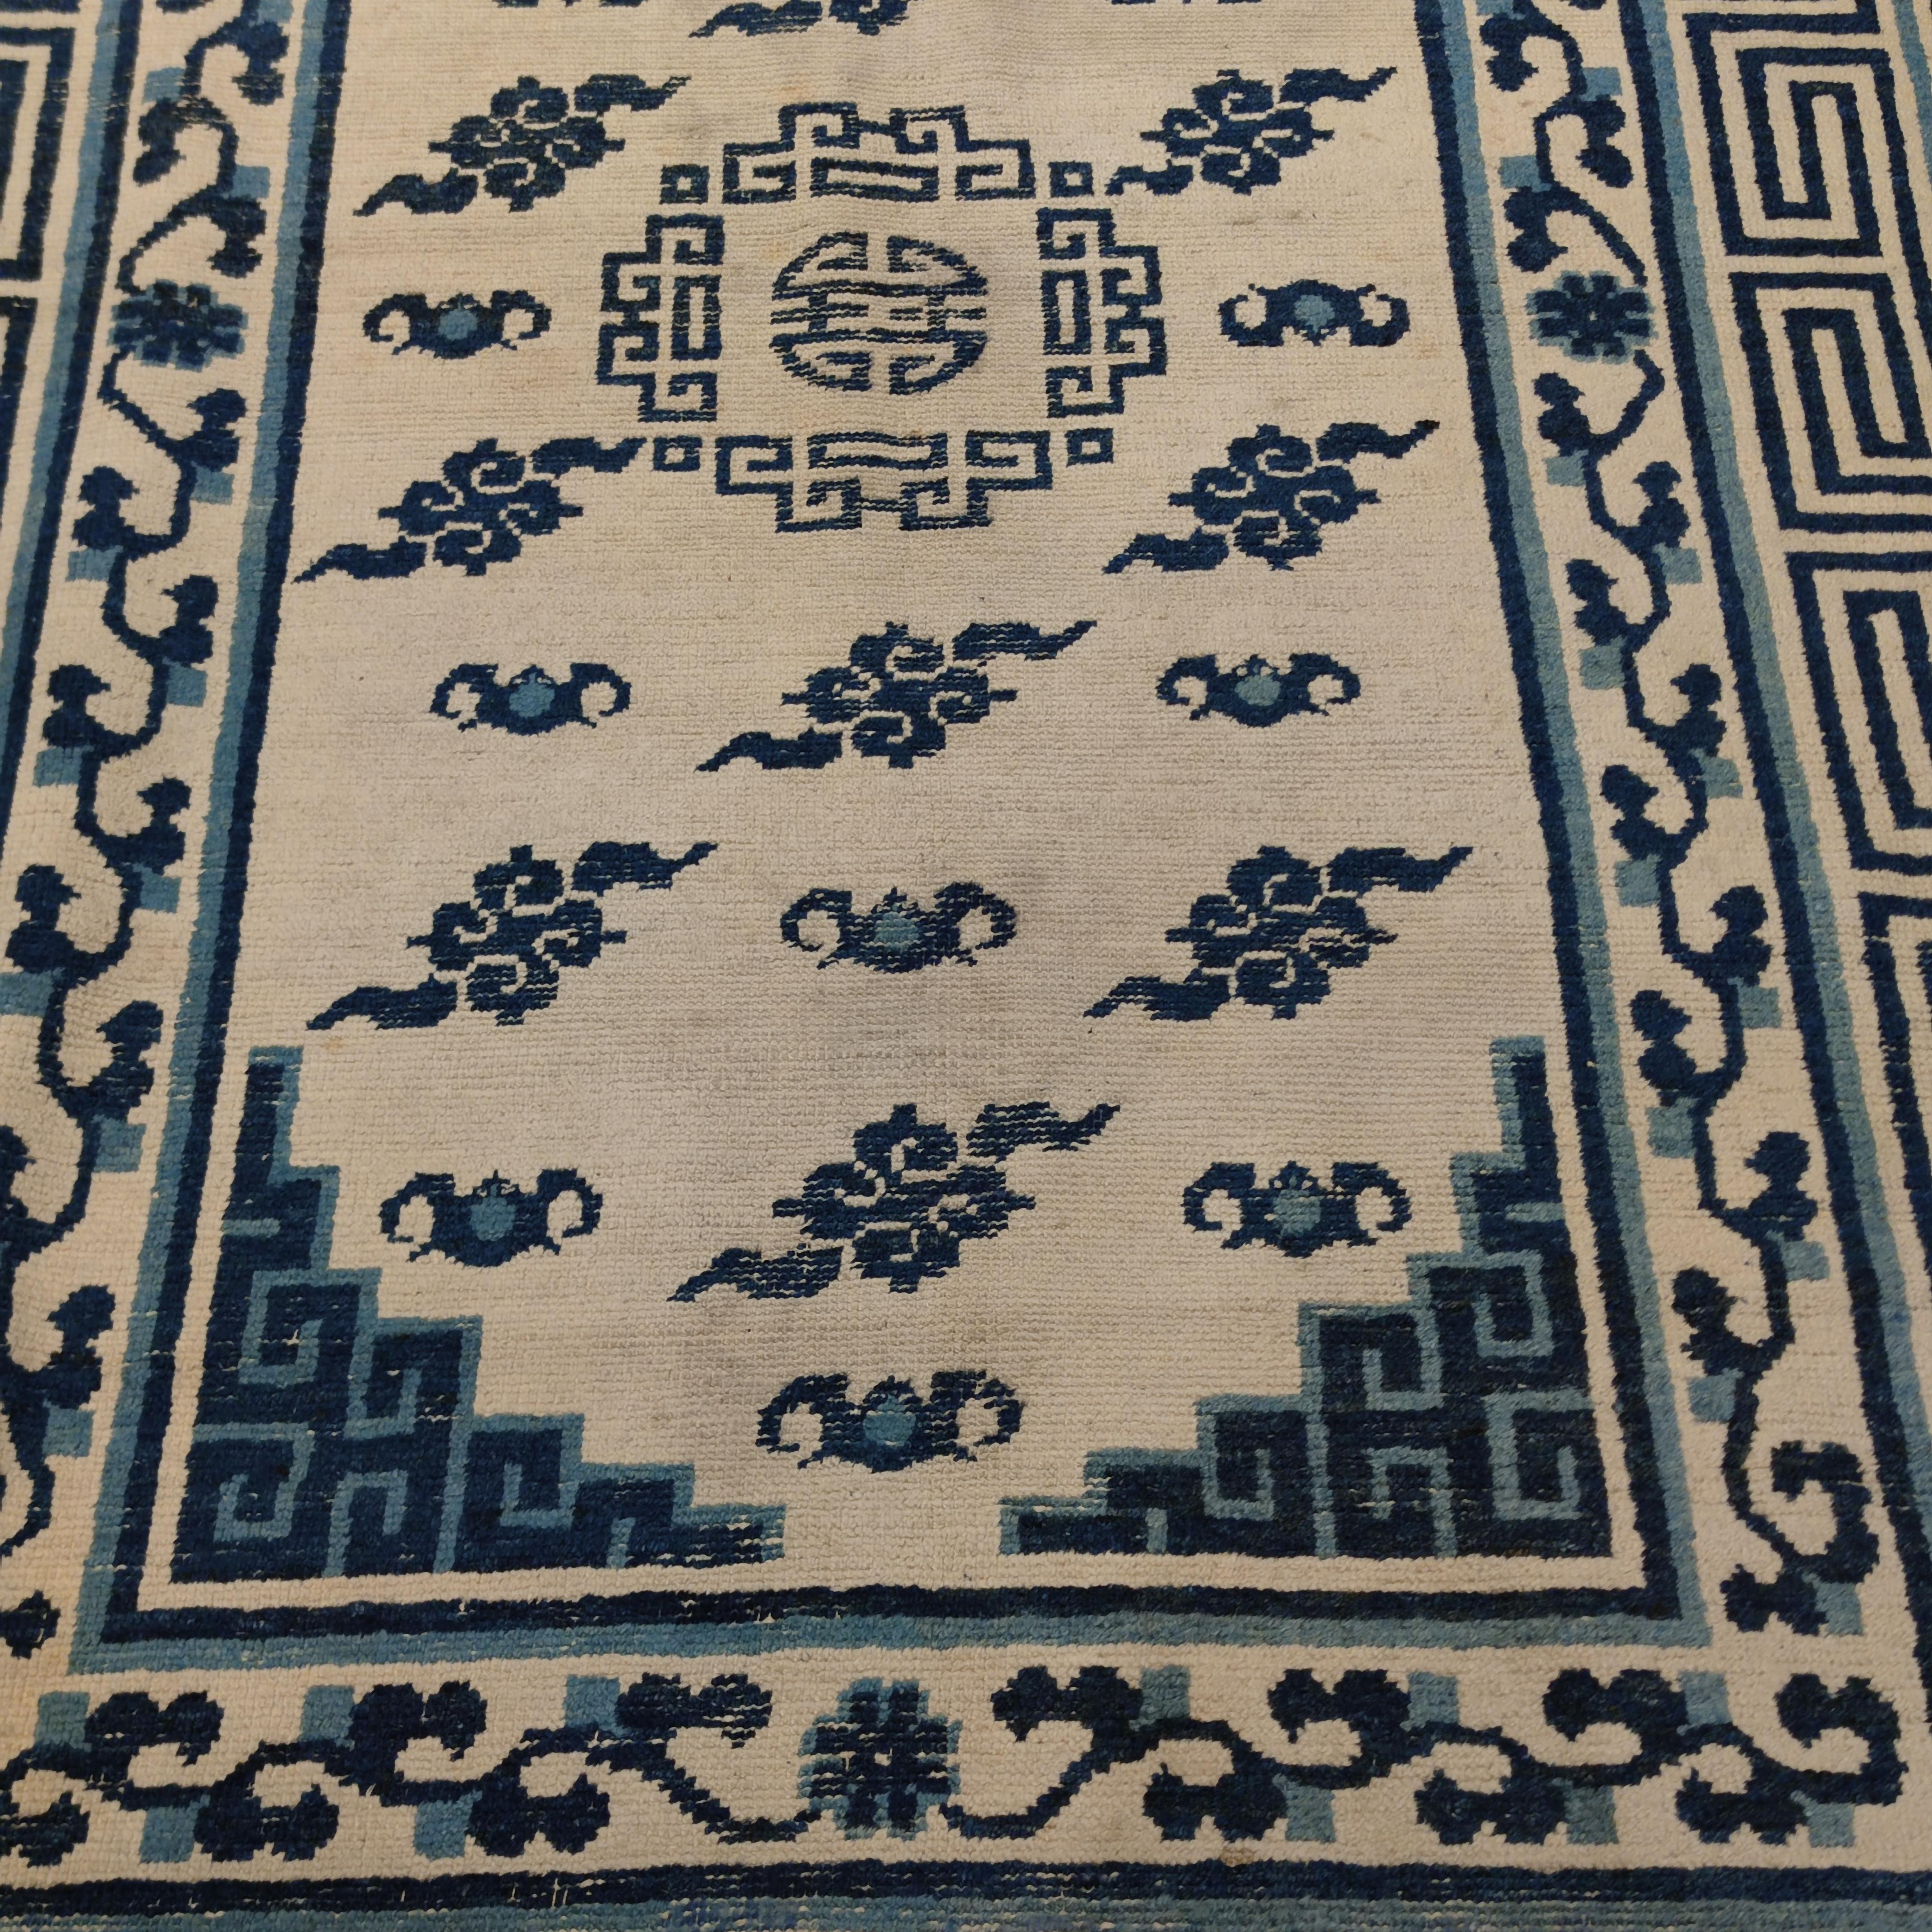 Antique Blue & White Mongolian Rug with Cloudbands and Longevity Symbols In Good Condition For Sale In Milan, IT